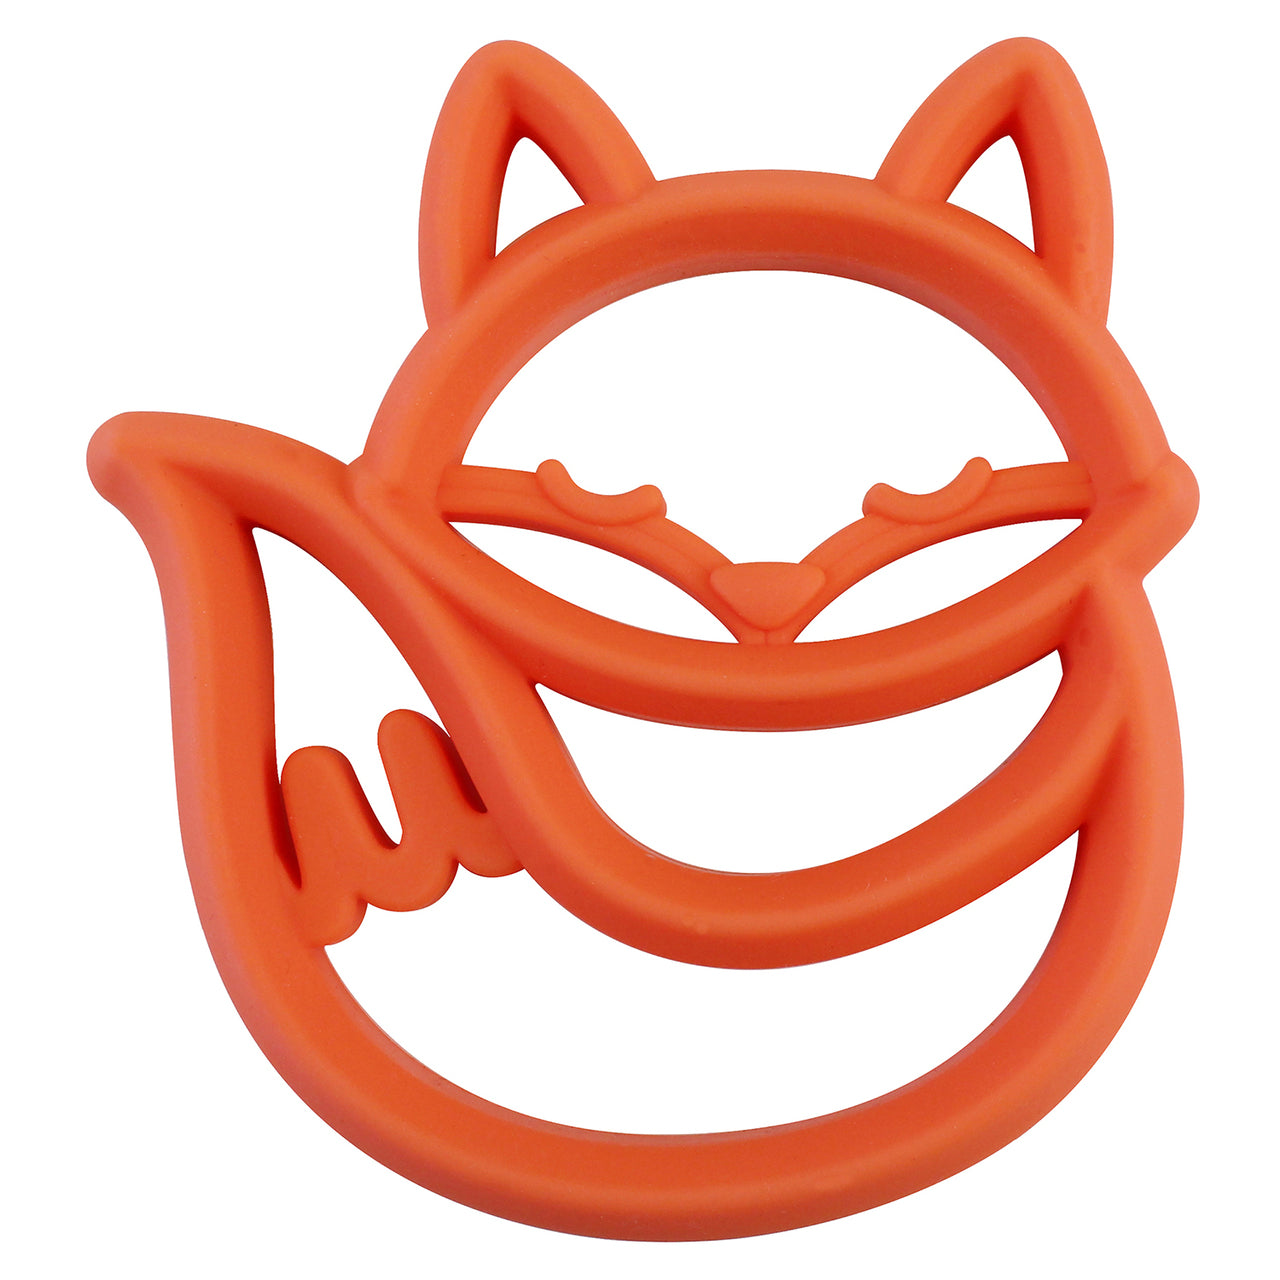 SpearmintLOVE’s baby Silicone Baby Teether, Fox